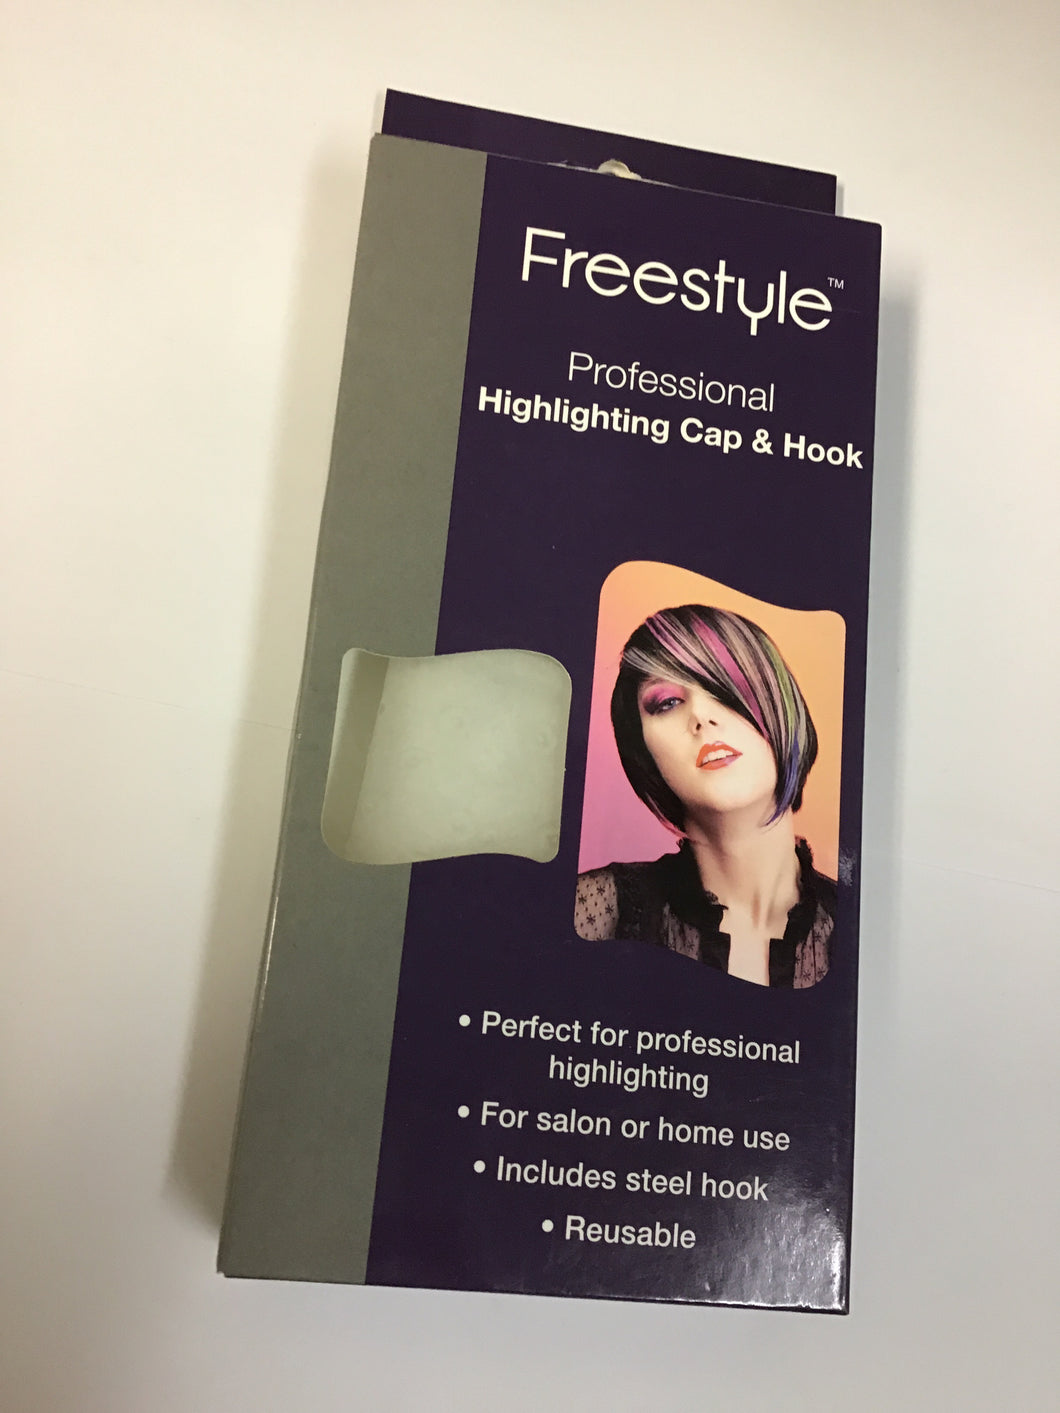 FREESTYLE Professional Highlighting Cap & Hook